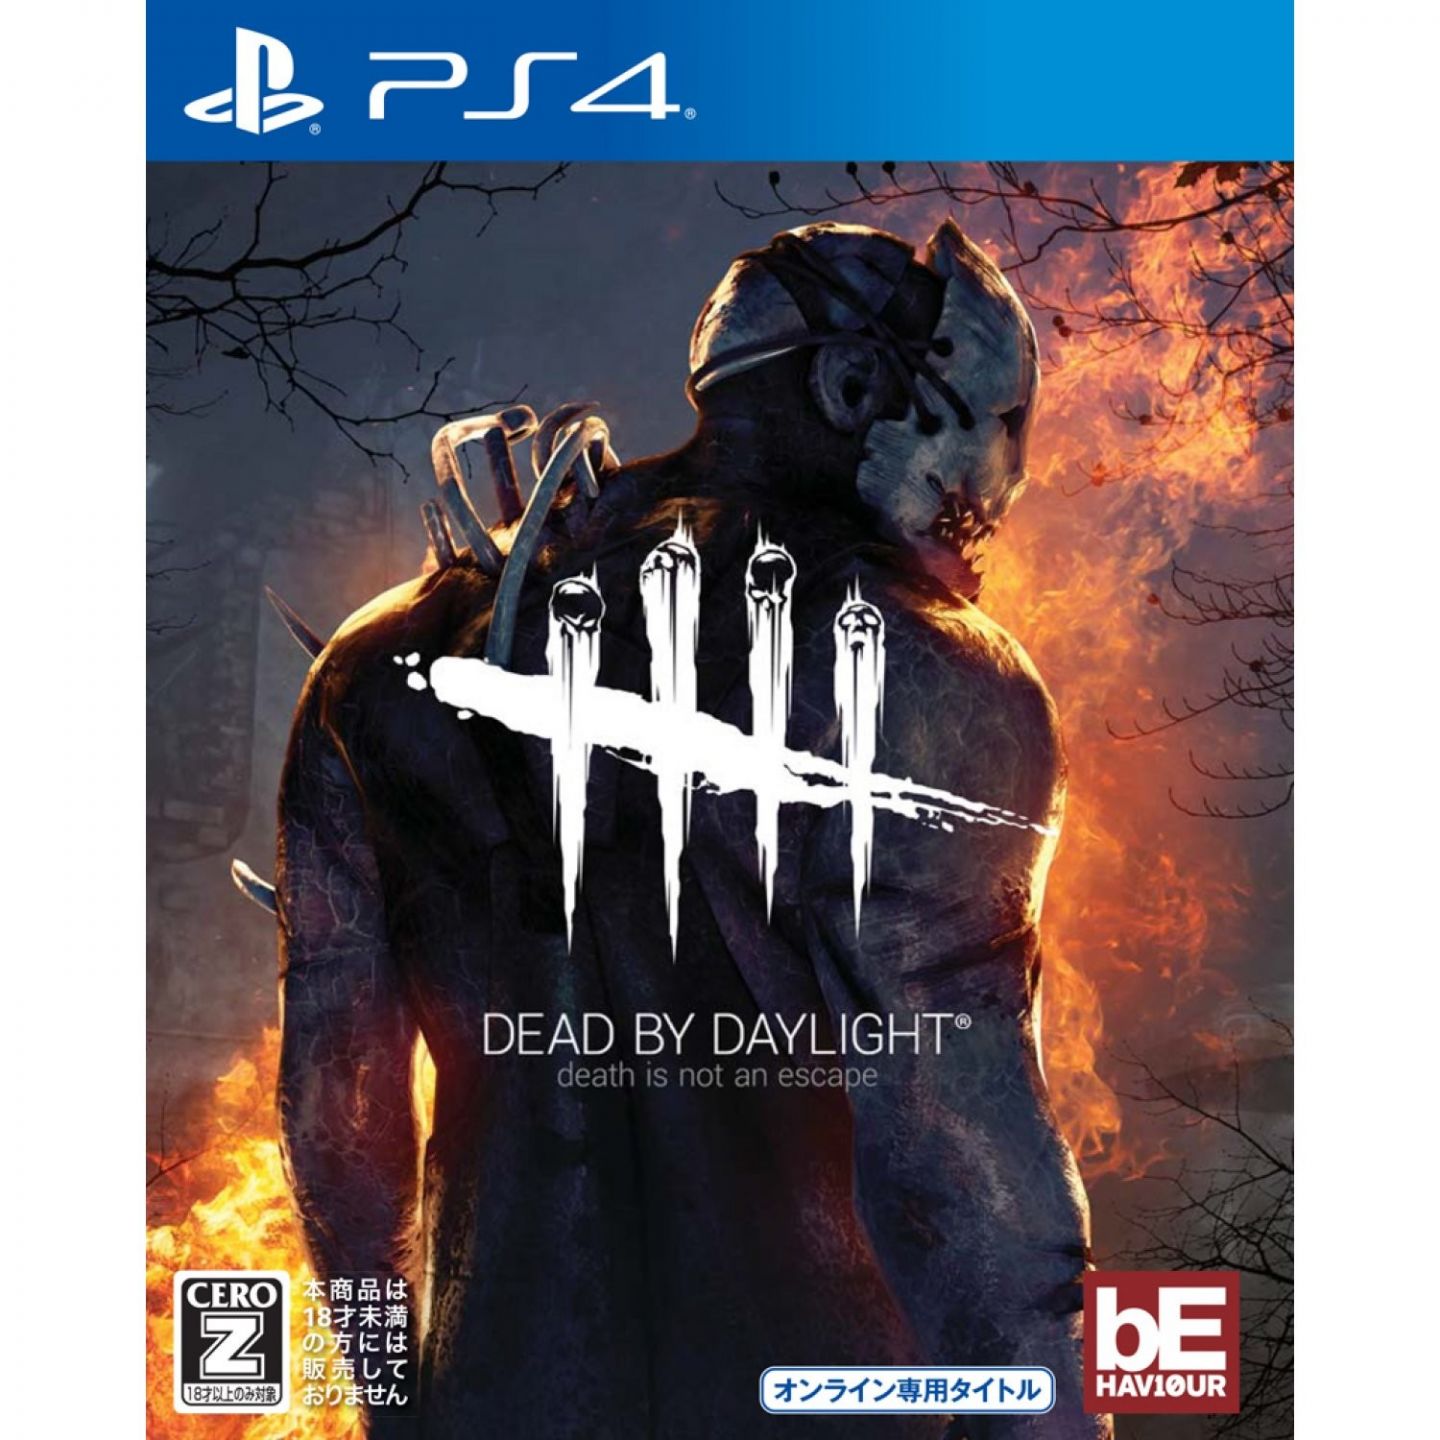 Dead by Daylight Silent Hill Edition - Playstation 4 PS 4 - Japan import